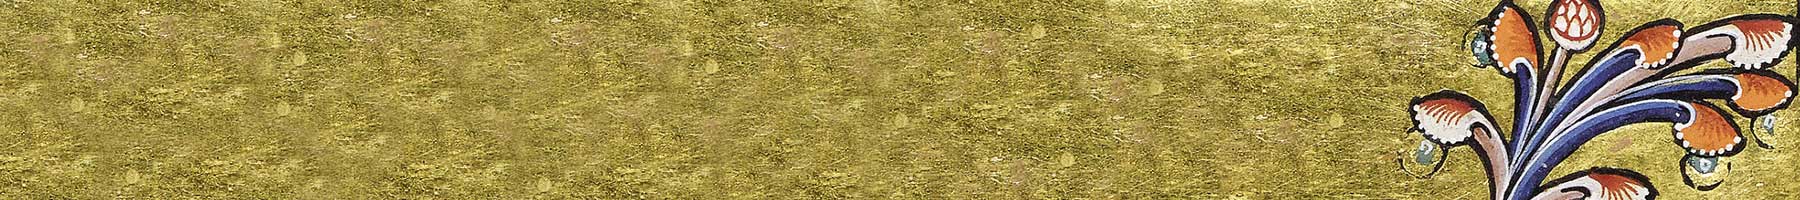 gold background with stylized leaves